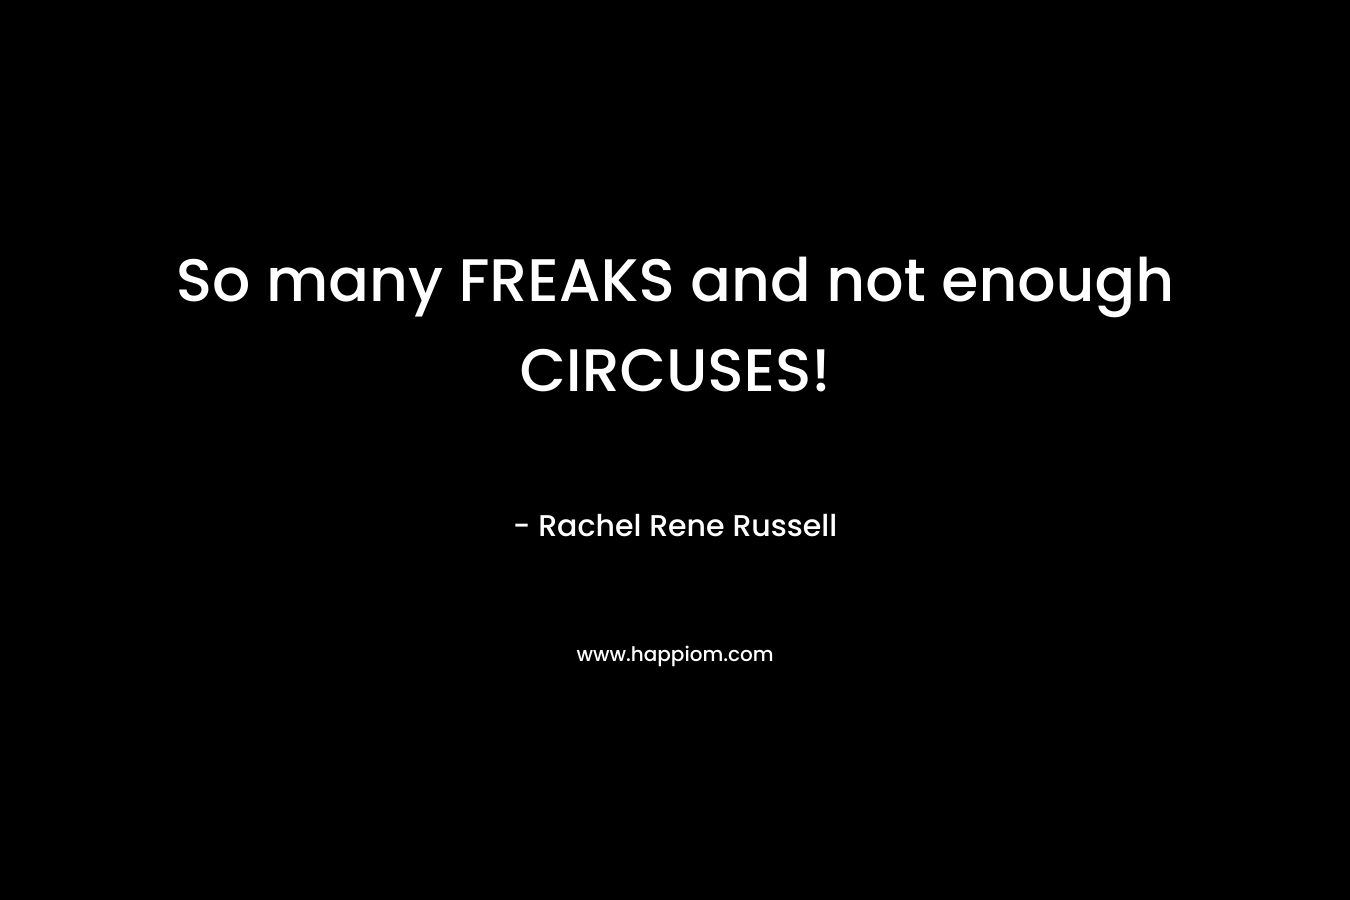 So many FREAKS and not enough CIRCUSES!